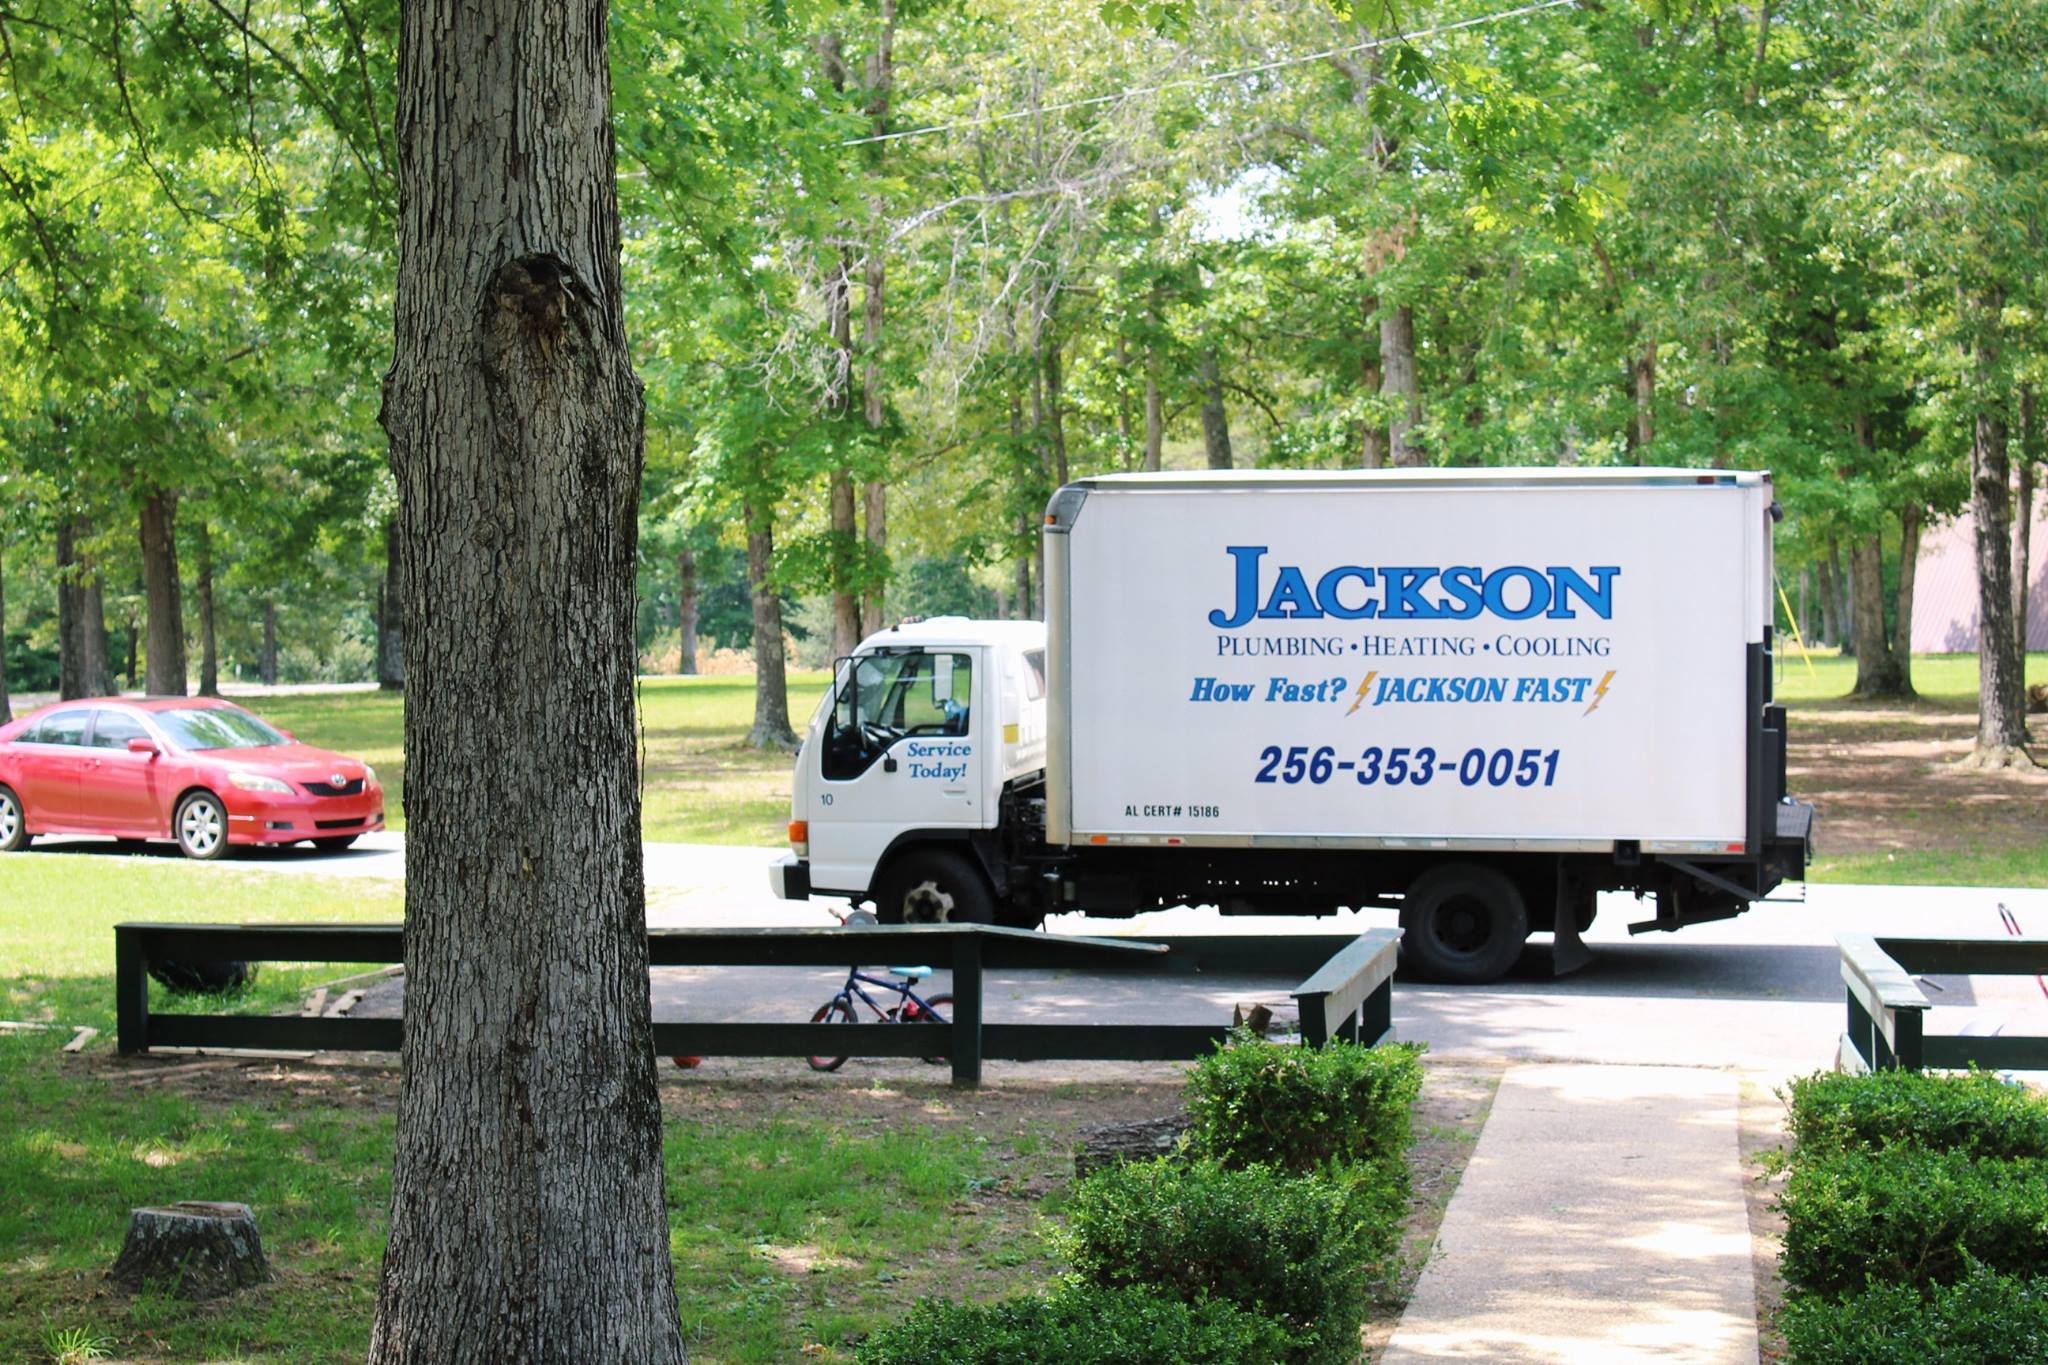 Jackson Heating and Cooling truck in front of Huntsville residence